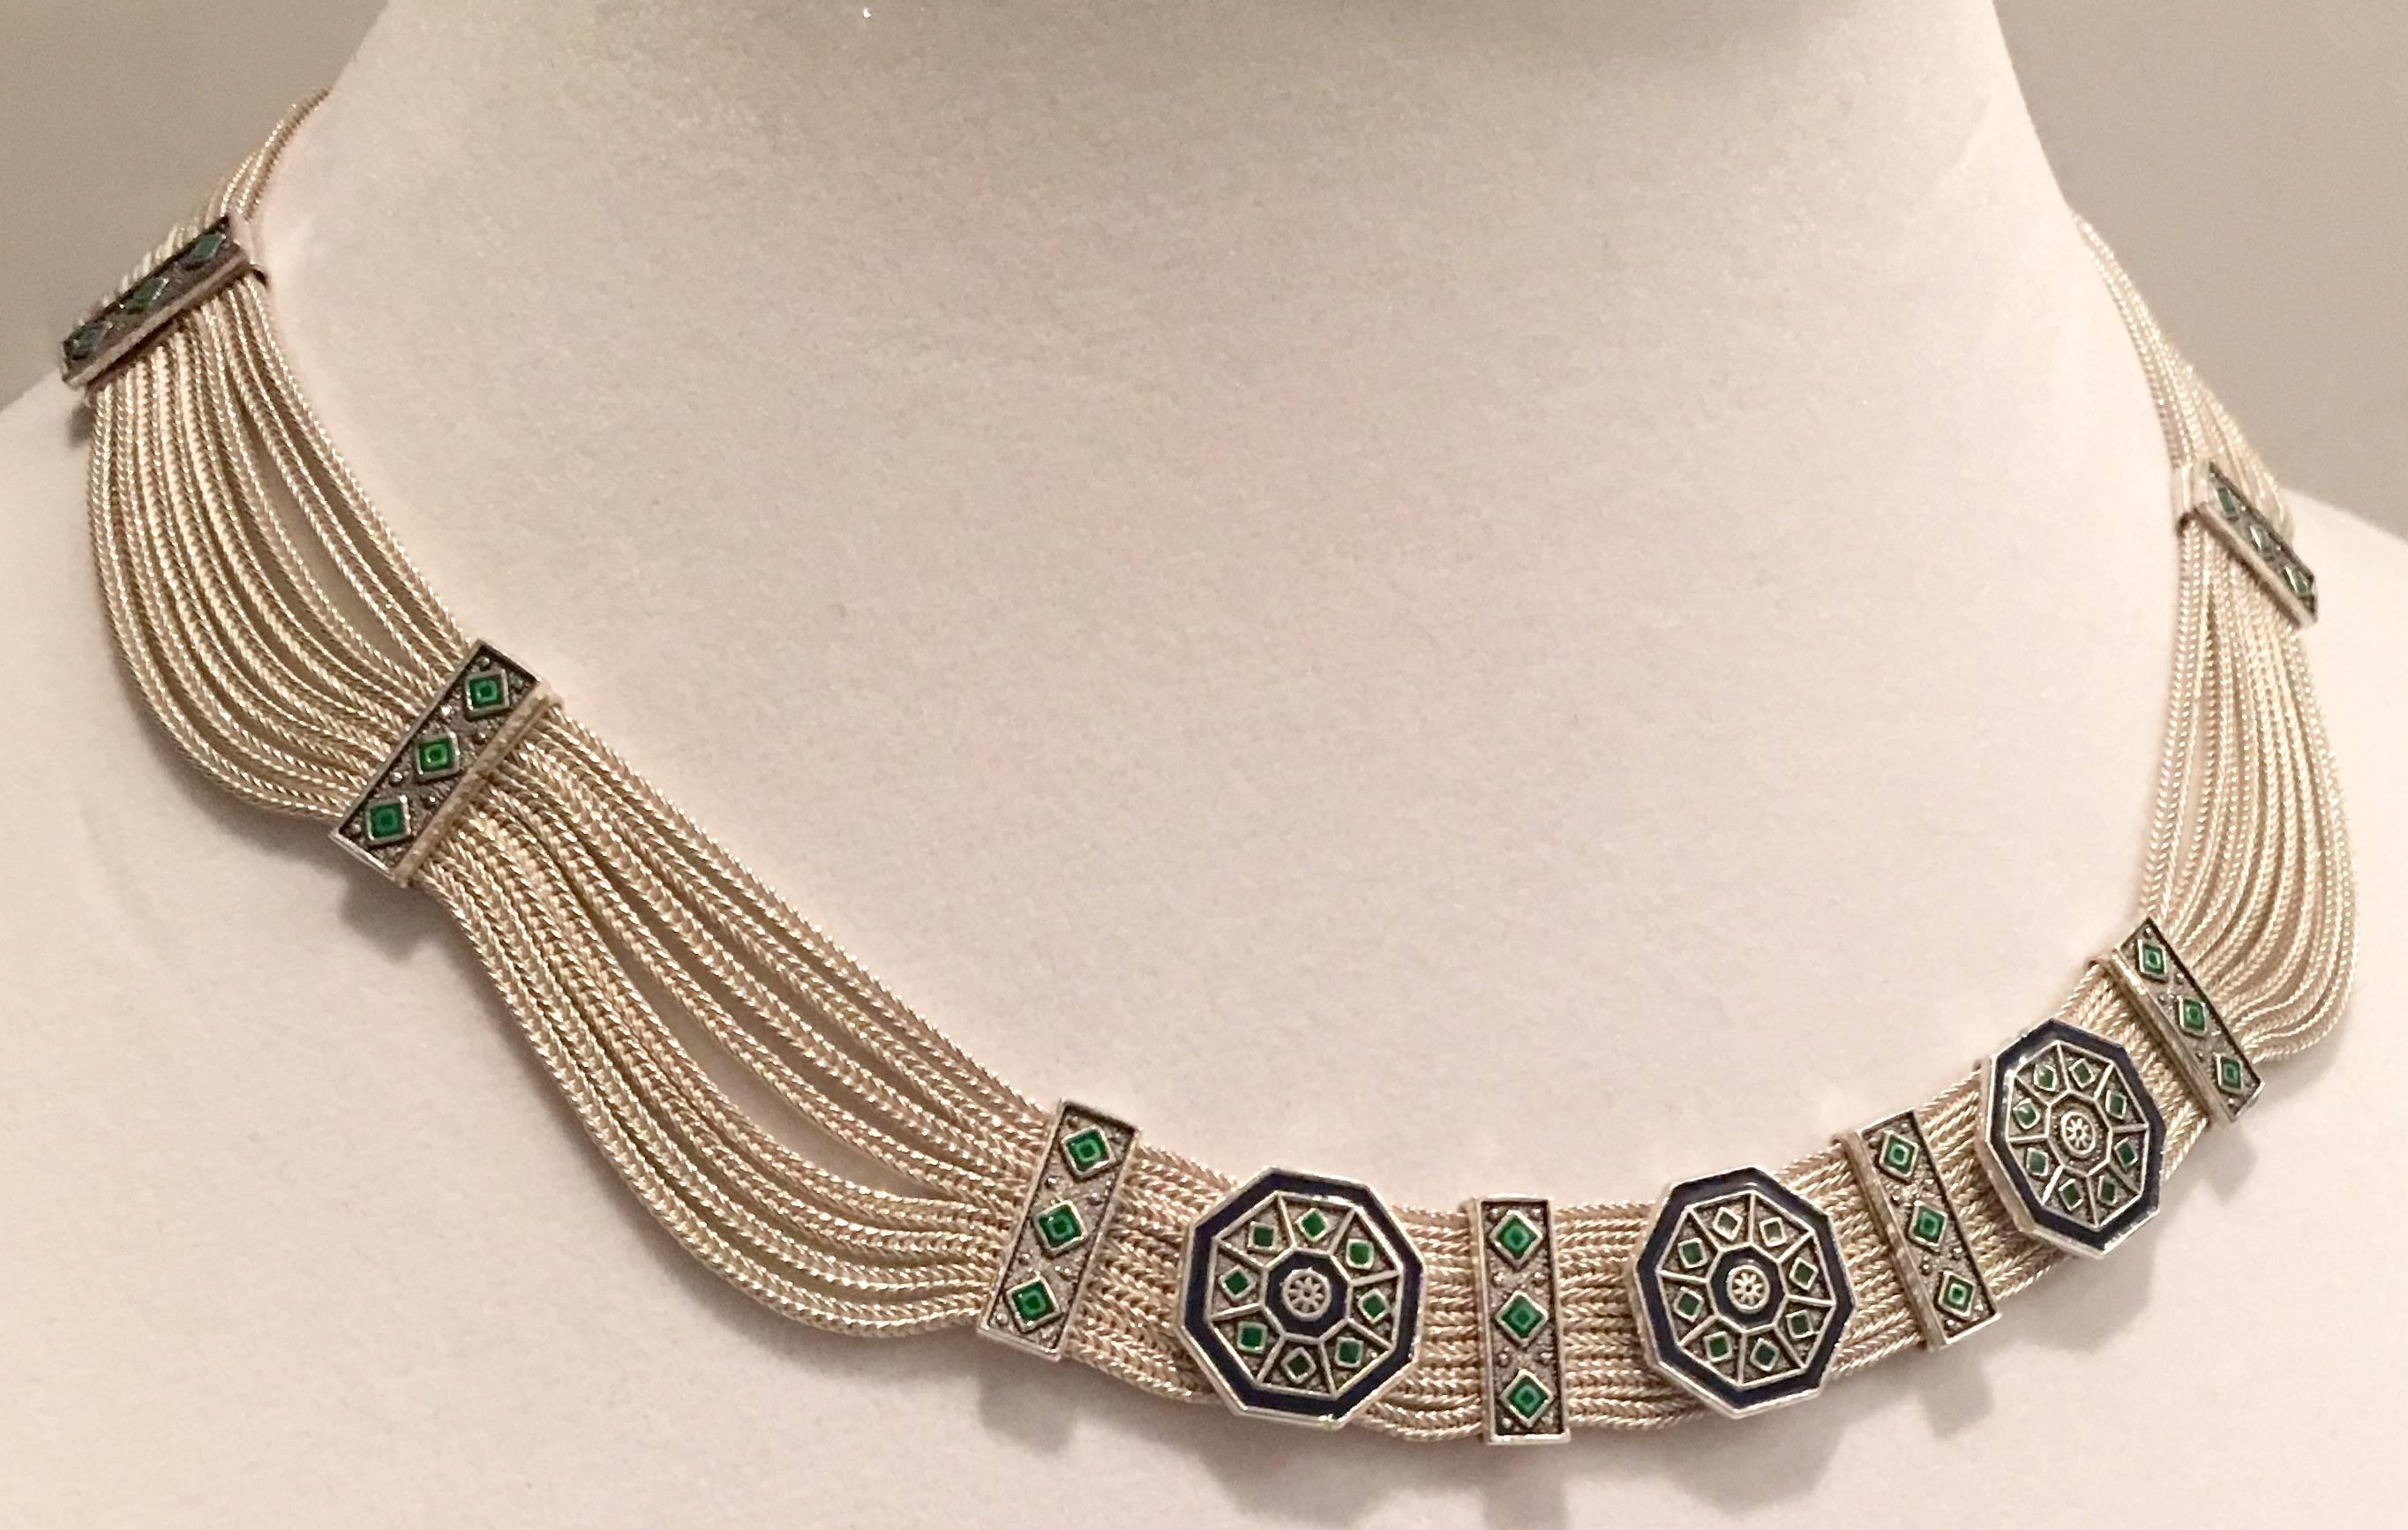 1970s Art Deco style Turkish sterling silver and enamel eight strand silver chain detail demi parure. This stunning necklace and bracelet set is adorned with enamel mosaic work in kelly green and navy blue. Each piece is signed 925 and in illegible